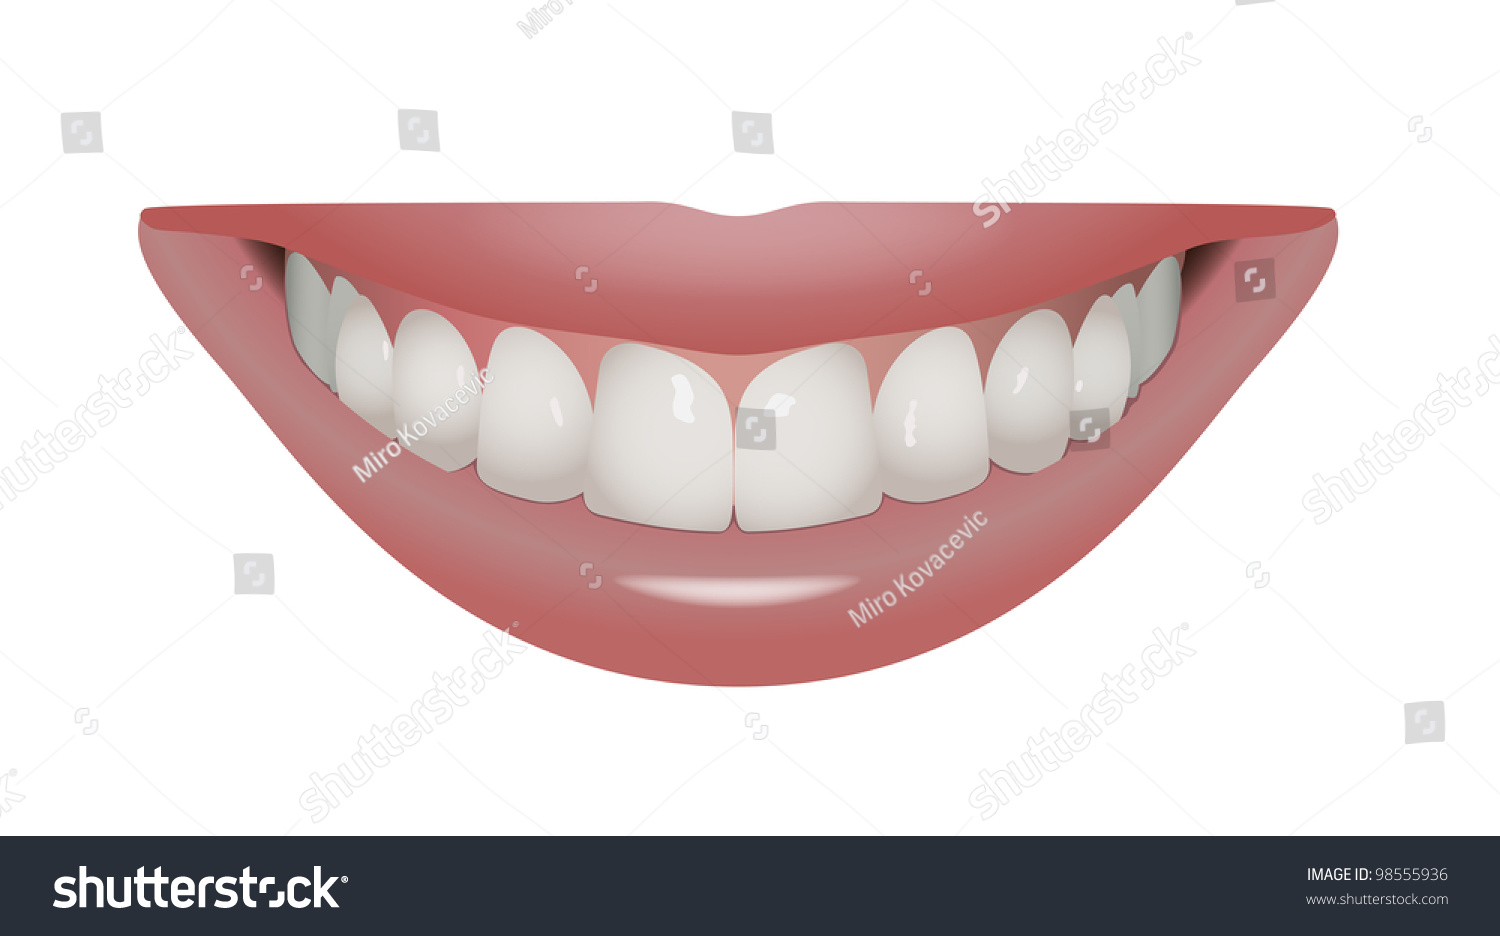 tooth clipart no background - photo #34